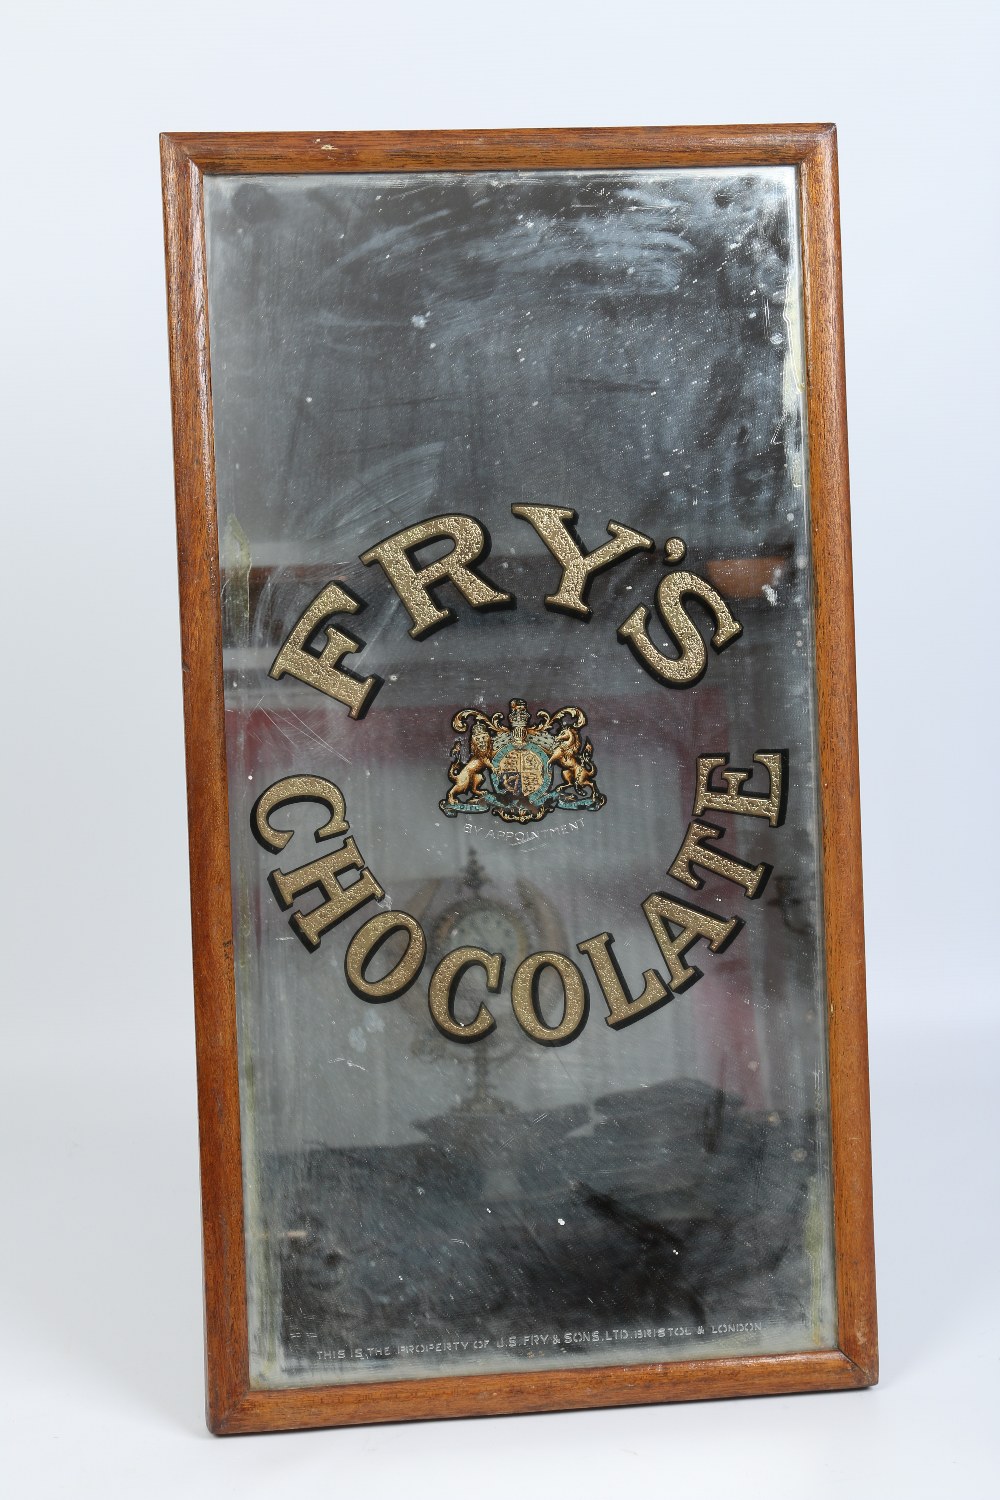 A vintage Royal Warrant Fry's Chocolate advertising mirror with gilt lettering and in oak frame.